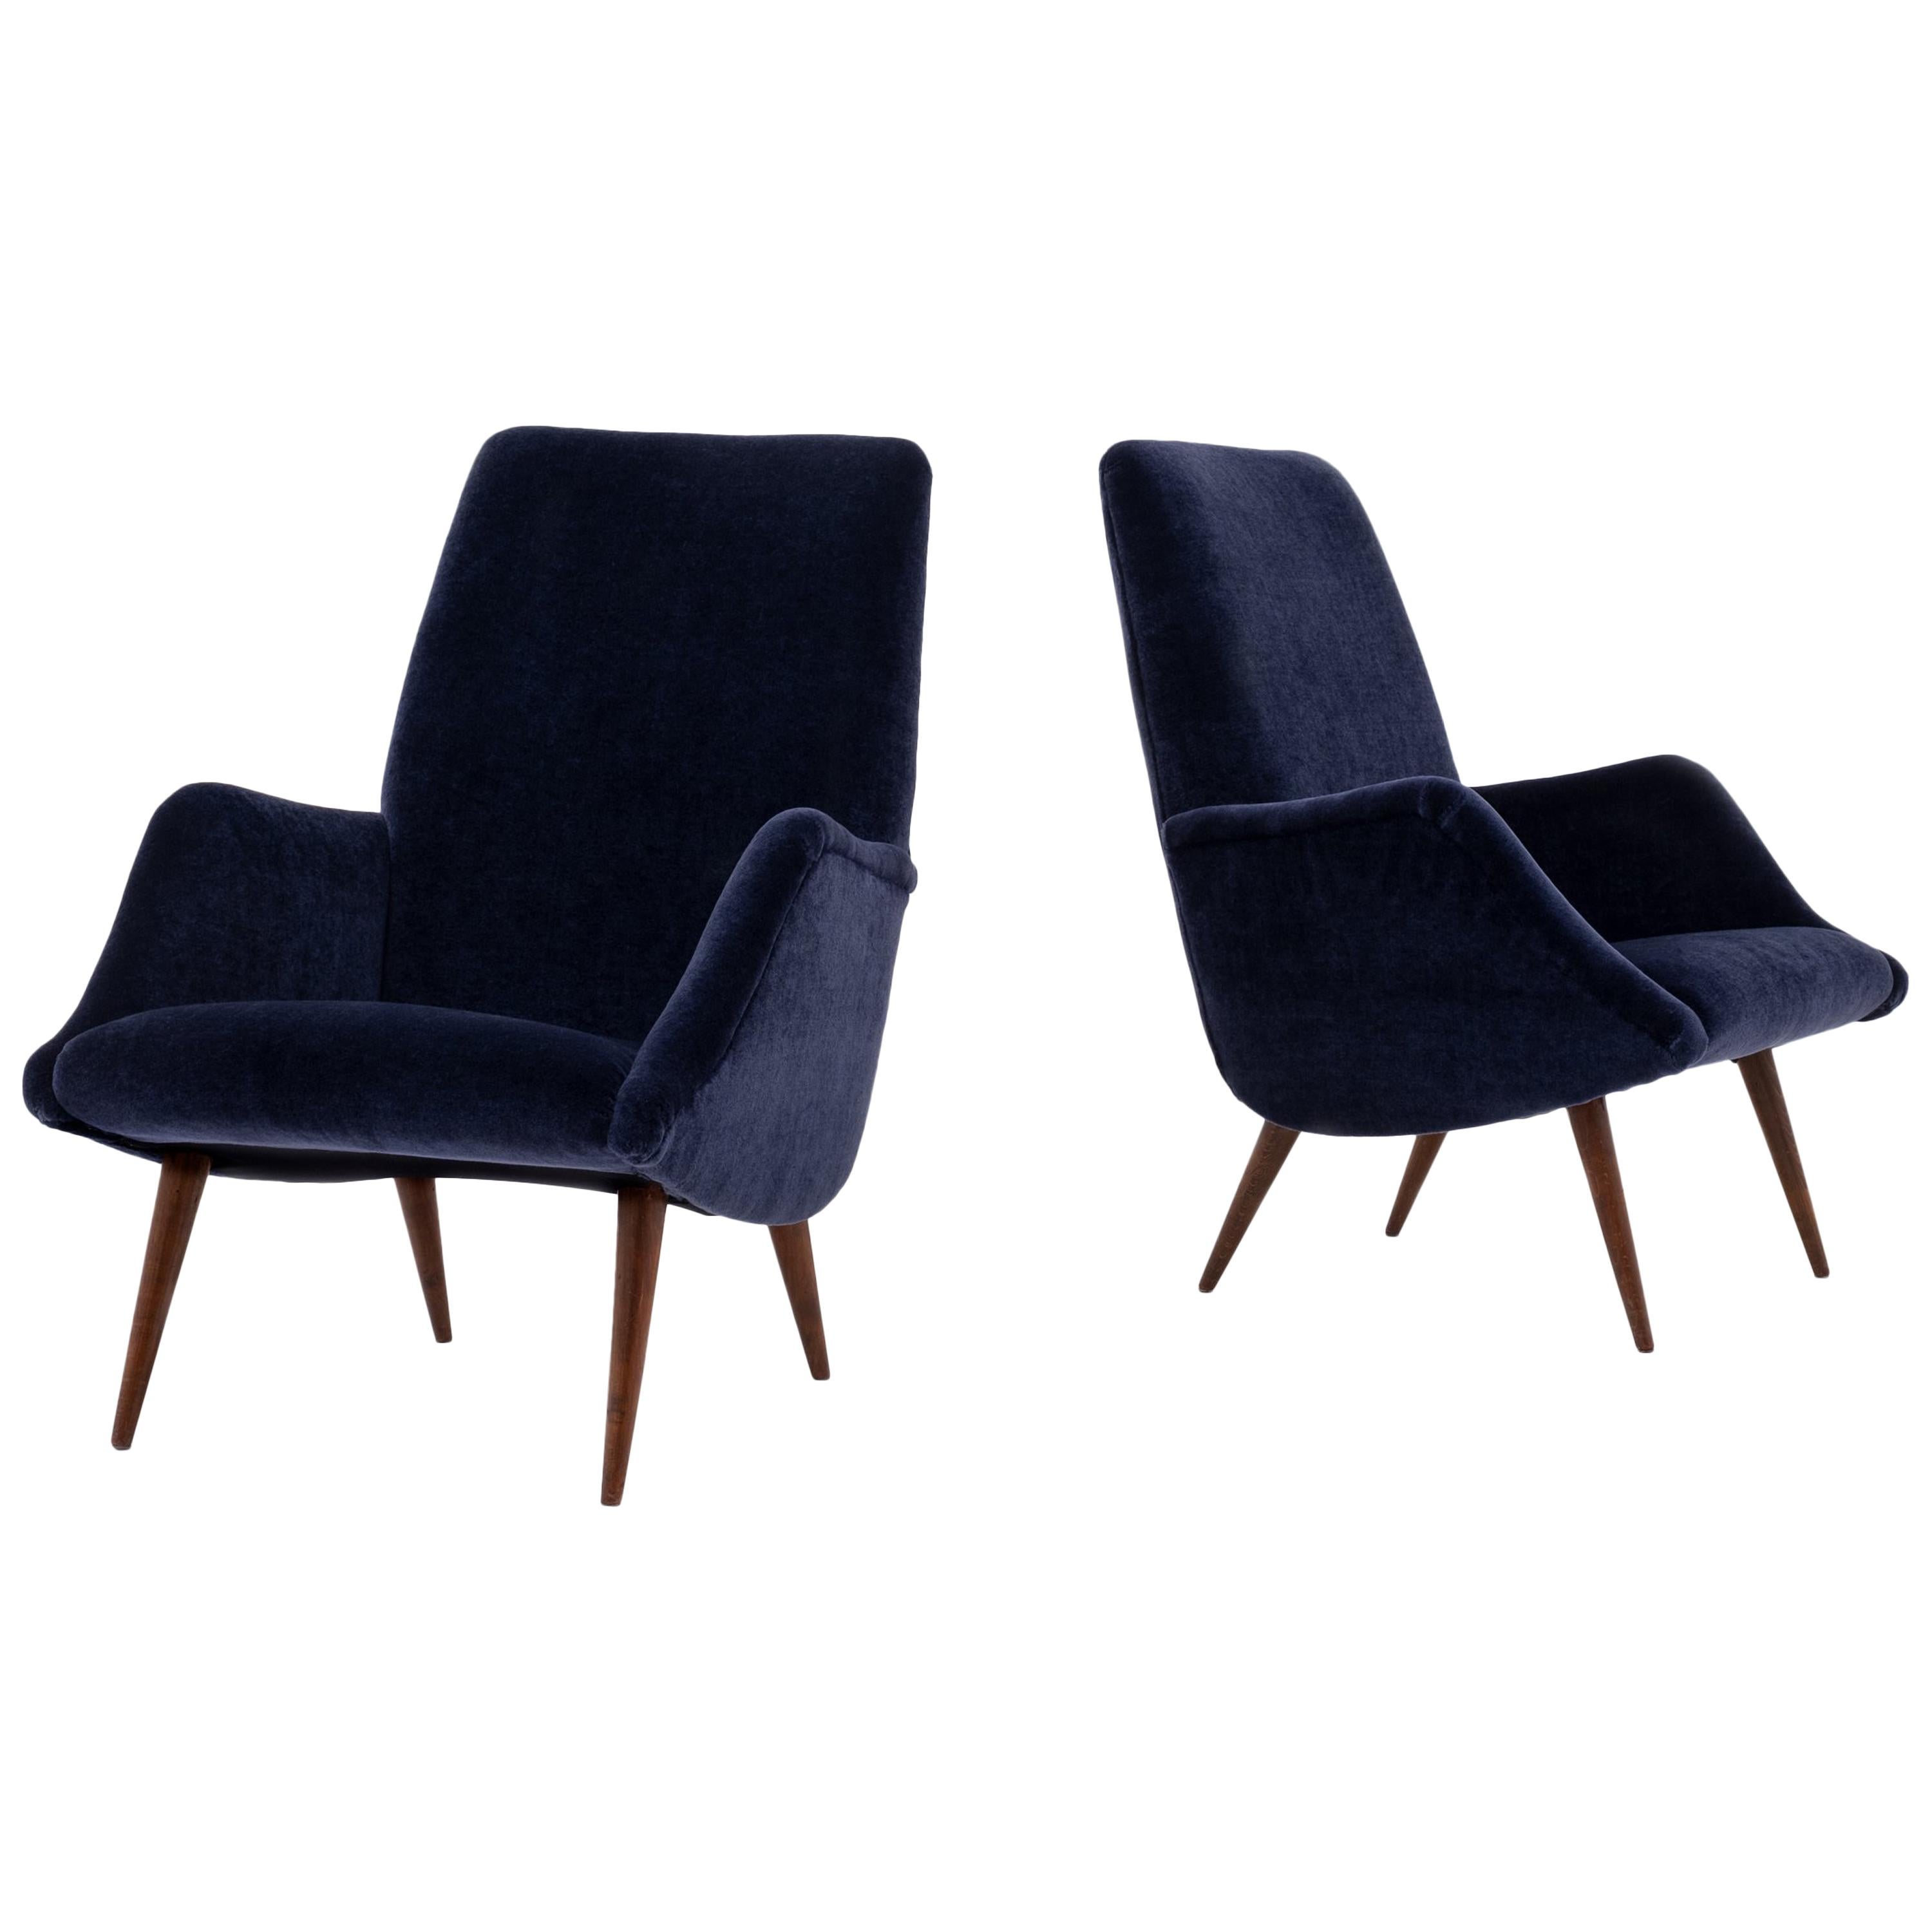 Mid-Century Modern Lounge Chairs in Mohair Velvet by Carlo de Carli for Cassina